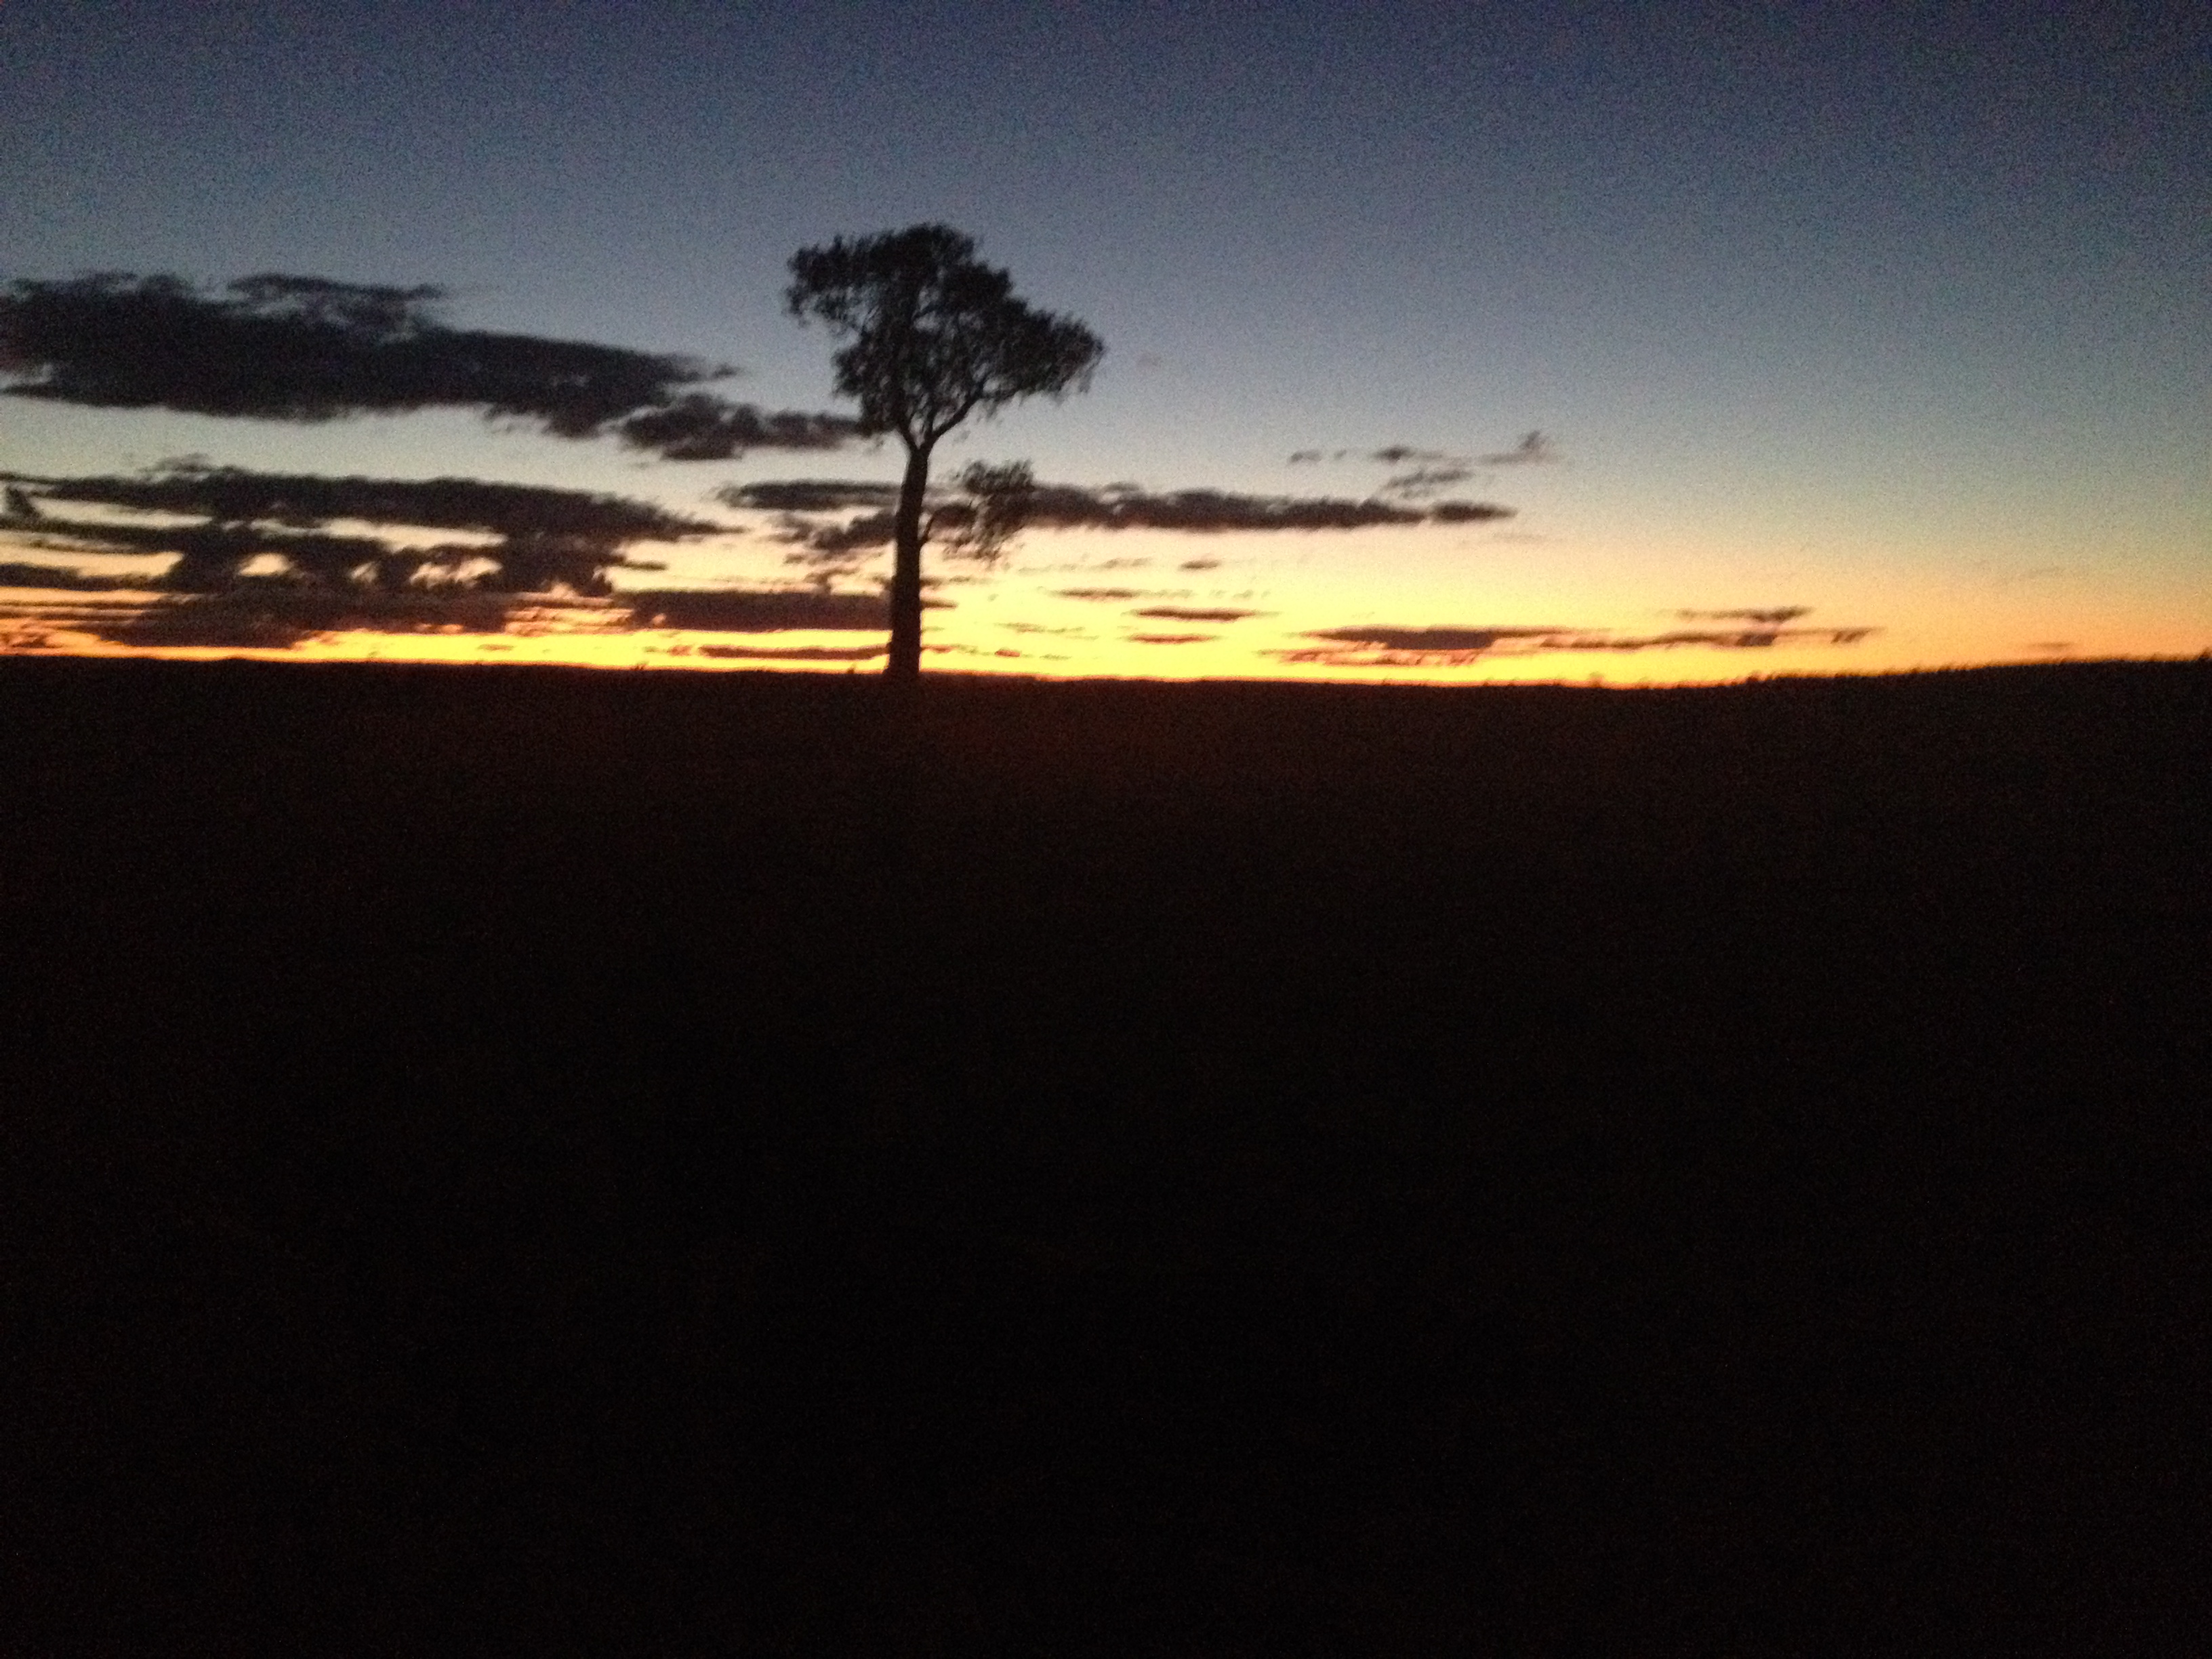 And the sun sets over the Queensland Outback